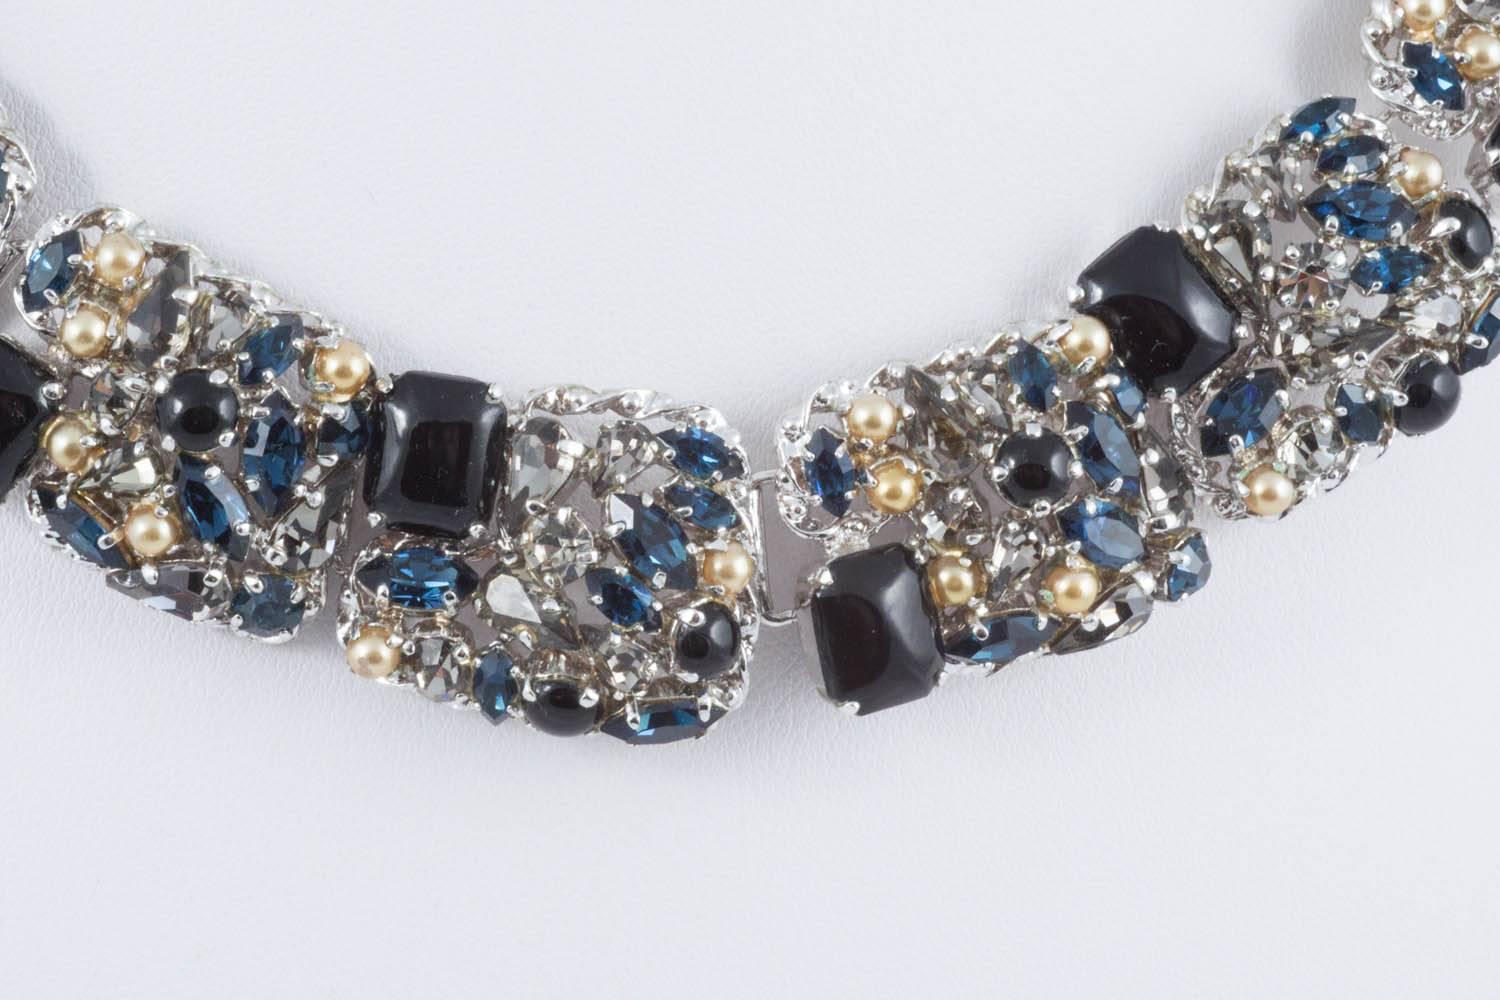 A rich melange of black cabuchon cushion cut paste, sapphire paste in assorted shapes, smokey grey paste, and paste pearls, all set in silvered metal, this parure, necklace and earrings, is dated 1963 and was made by Henkel and Grosse for Christian